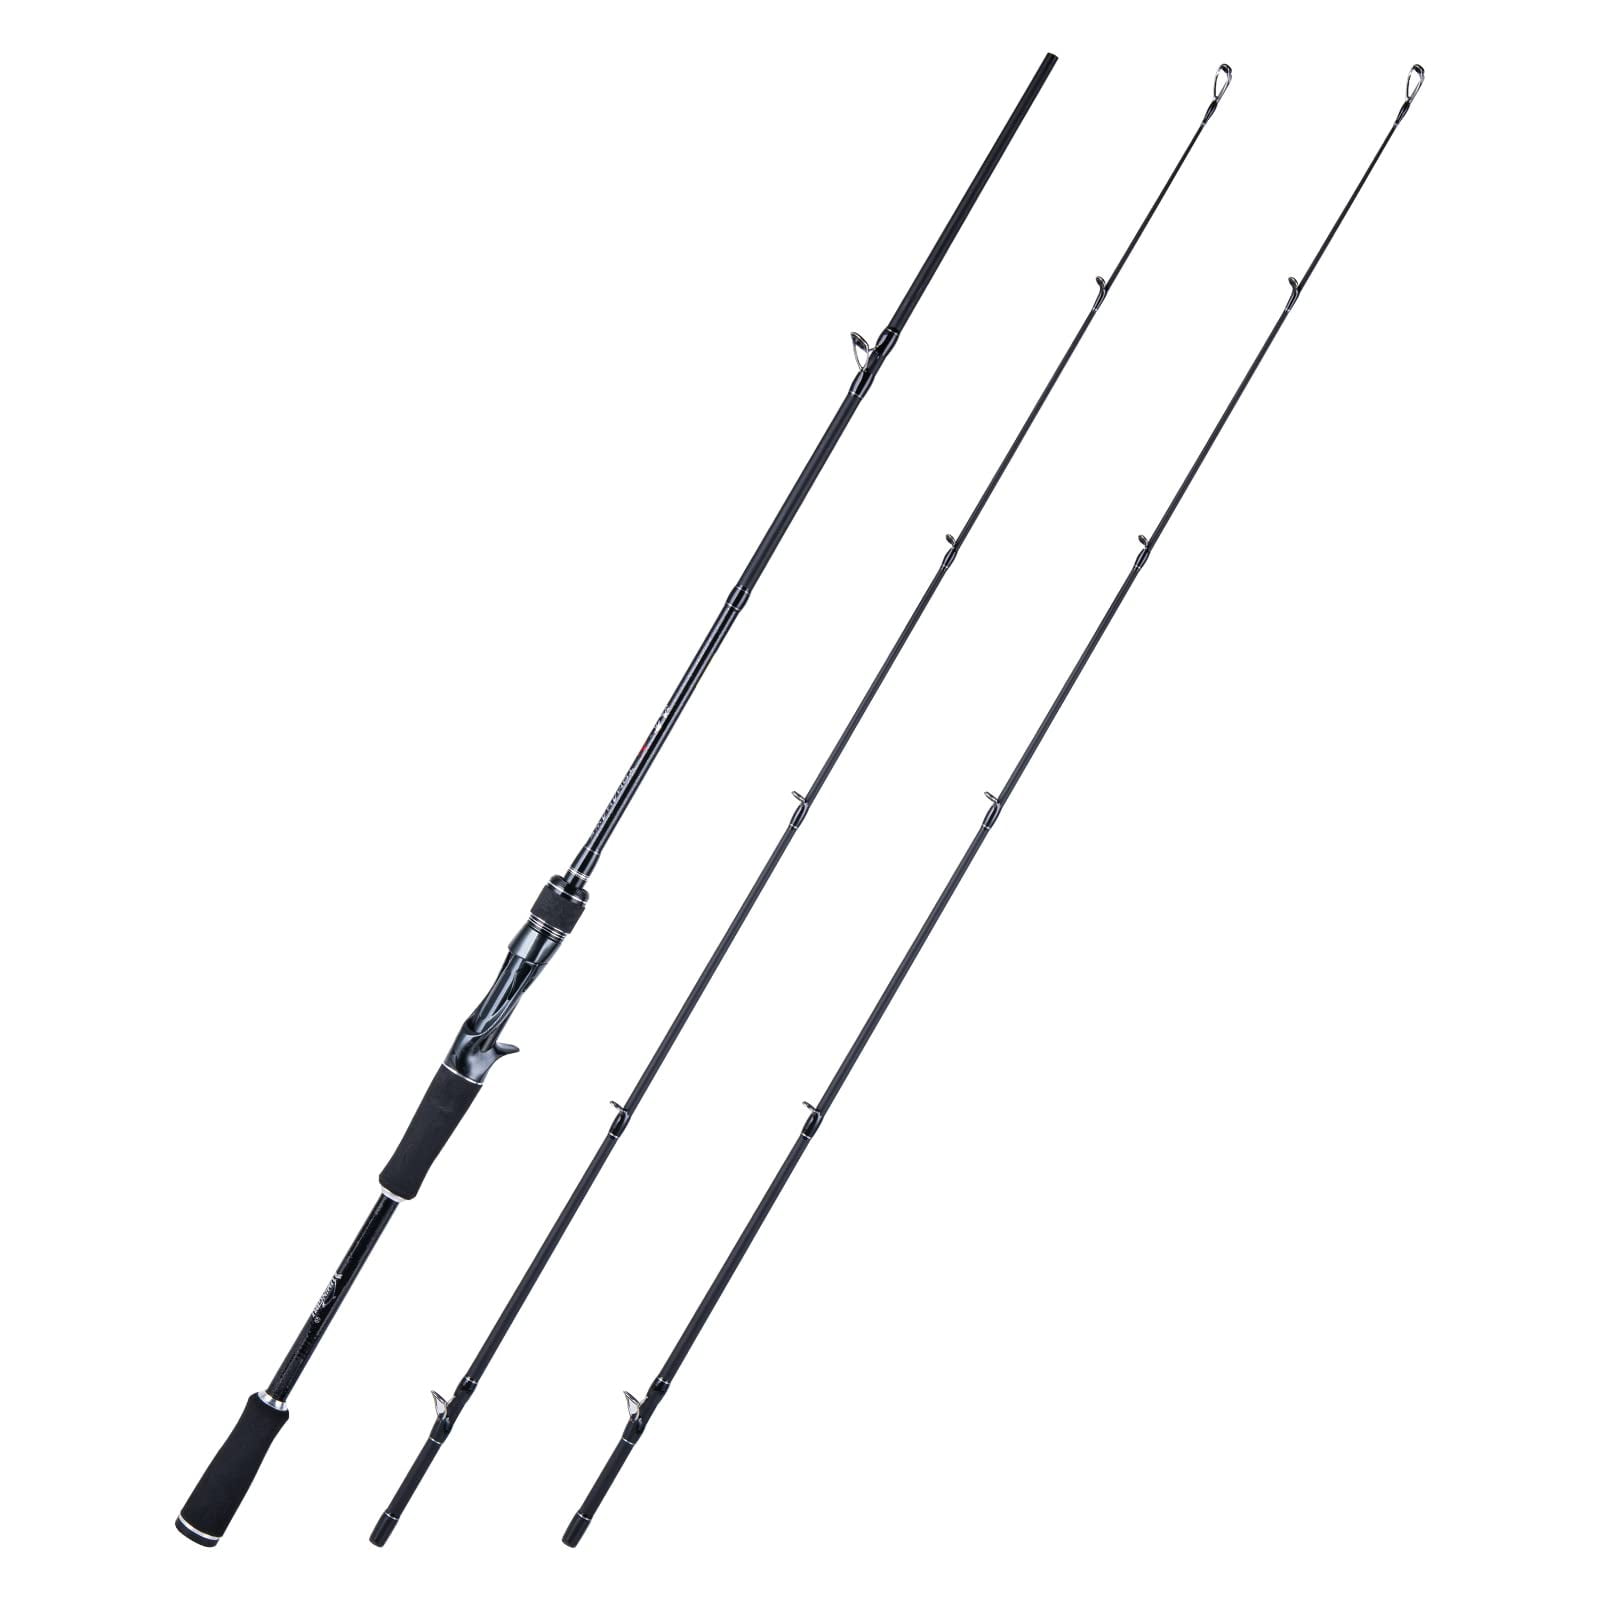 Goture Fishing Rod Carbon Fiber Casting&Spinning Rod with 2-Tip M